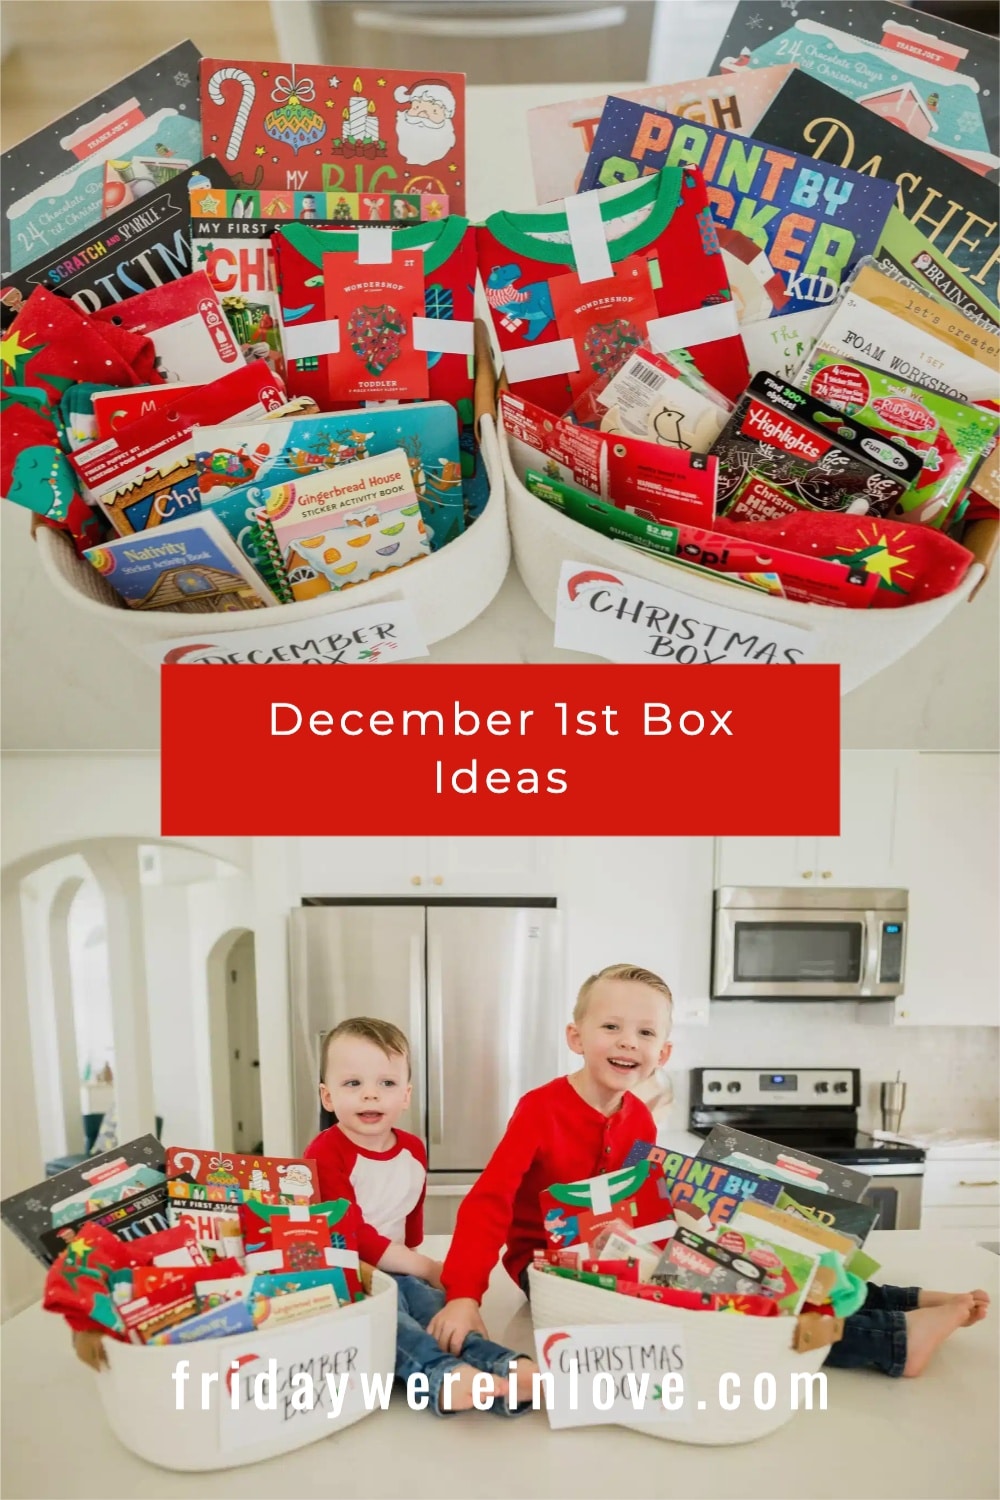 Christmas Box Ideas + What to Put in a December 1st Box